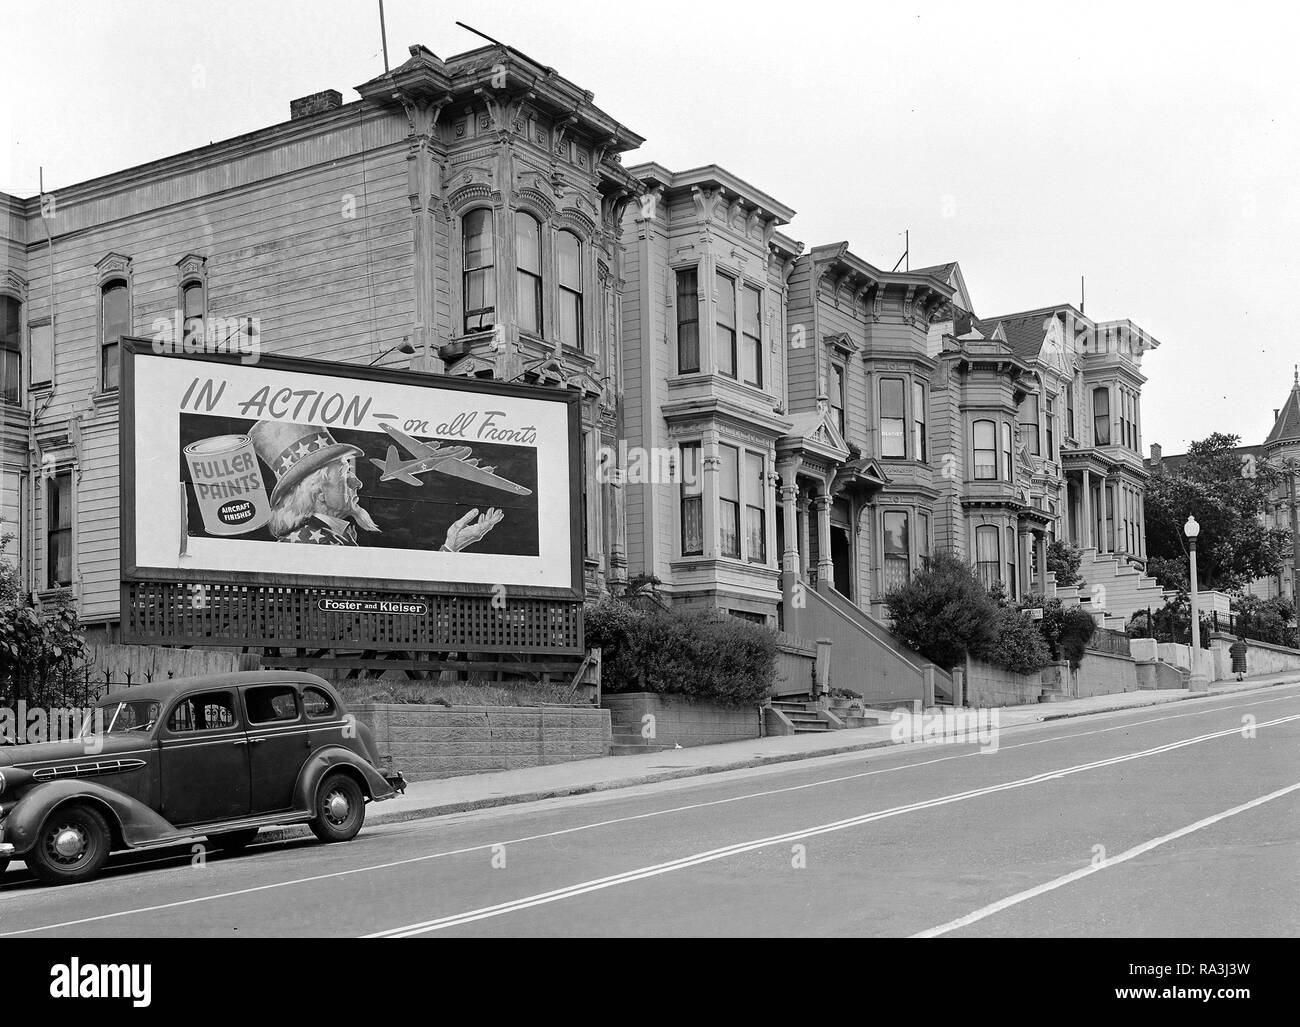 San Francisco, California. While American troops were going in action on far-flung fronts, residents of Japanese ancestry were being evacuated from this neighborhod on Post Street 4/7/1942 Stock Photo